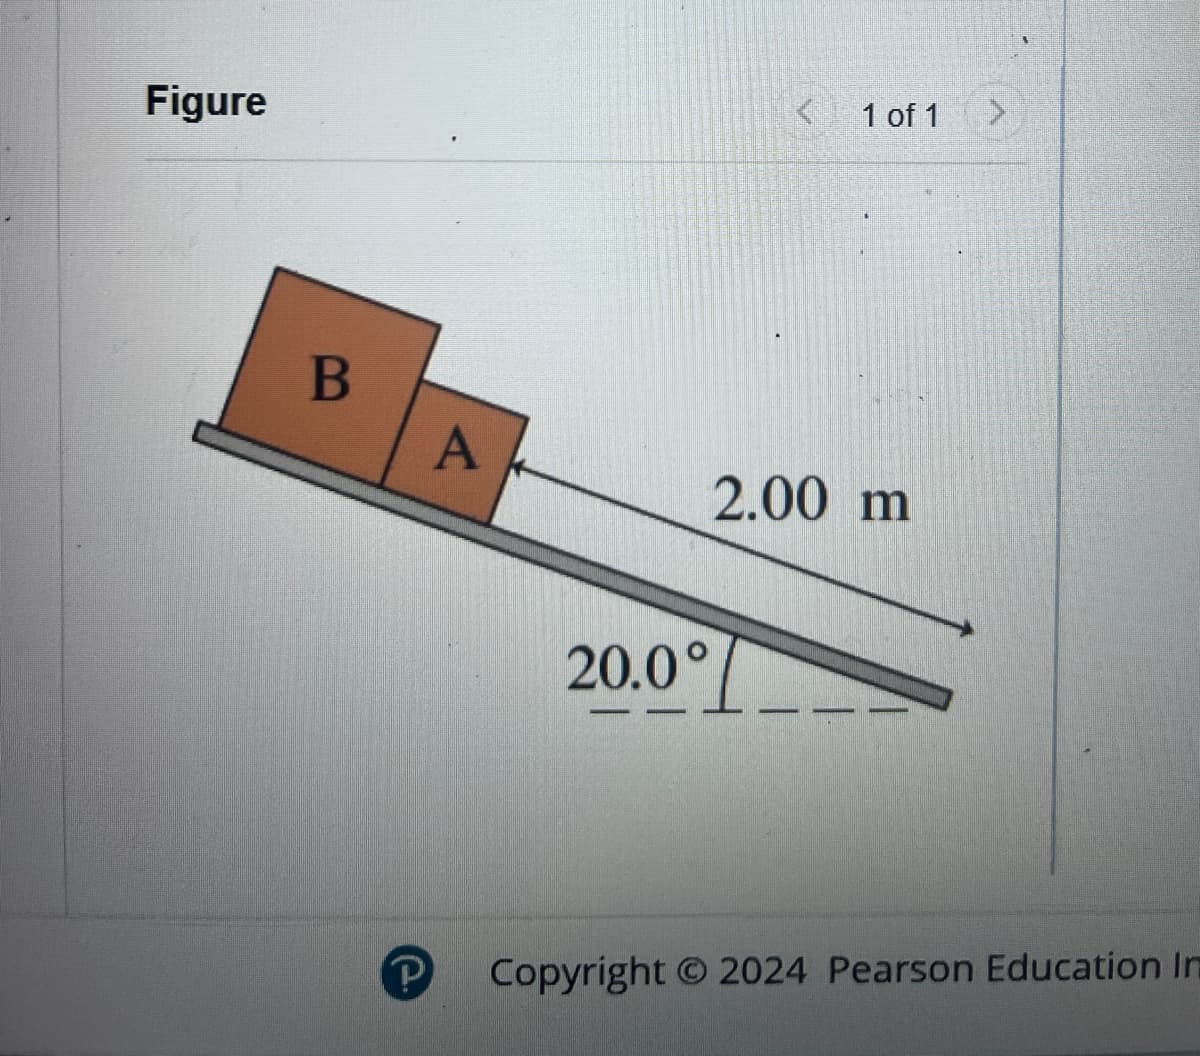 Figure
B
P
A
< 1 of 1
2.00 m
20.0°
>
Copyright © 2024 Pearson Education In